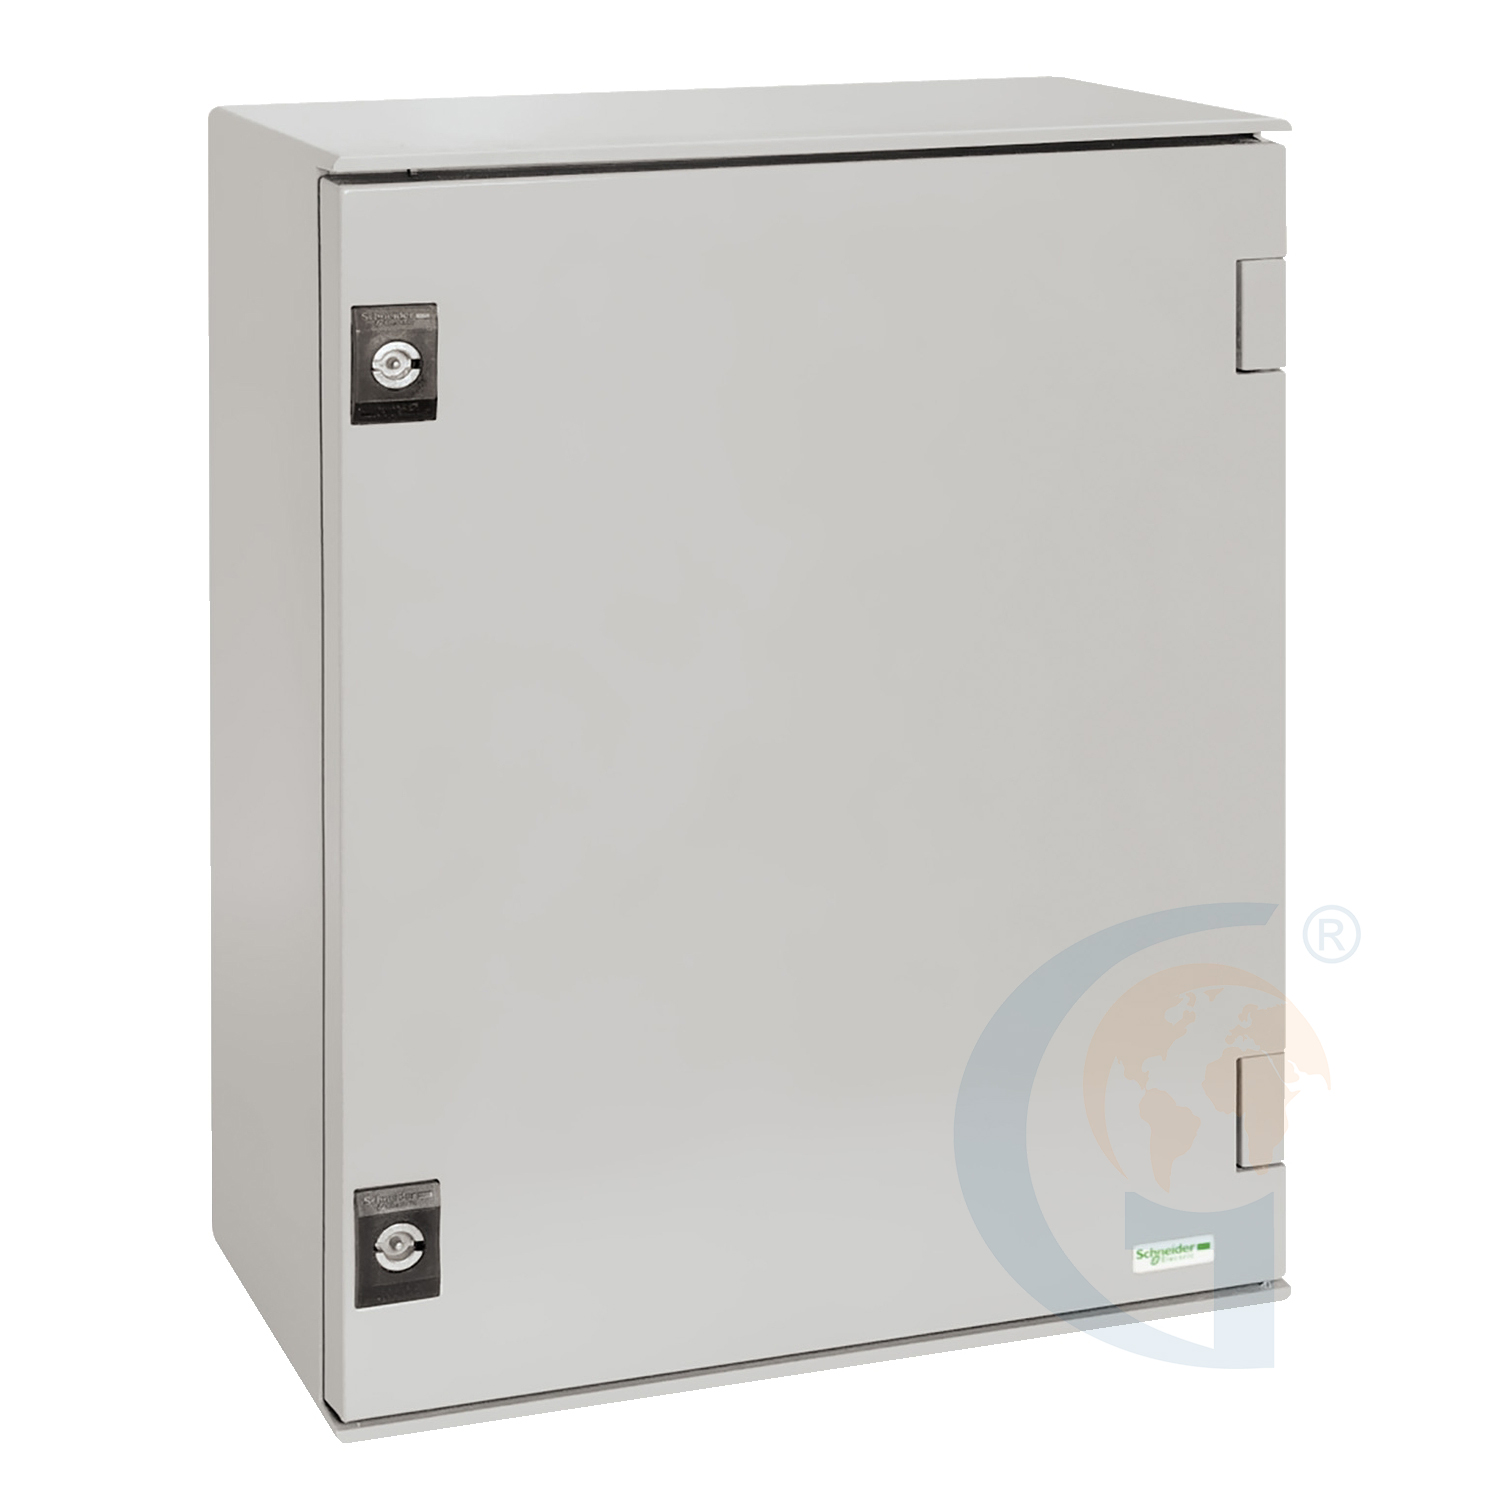 Schneider Electric NSYPLM75PG WALL-MOUNTING ENCL. POLYESTER MONOBLOC IP66 H747XW536XD300MM+METAL MOUNT.PLATE https://gesrepair.com/wp-content/uploads/2020/Schneider/Schneider_Electric_NSYPLM75PG_.jpg